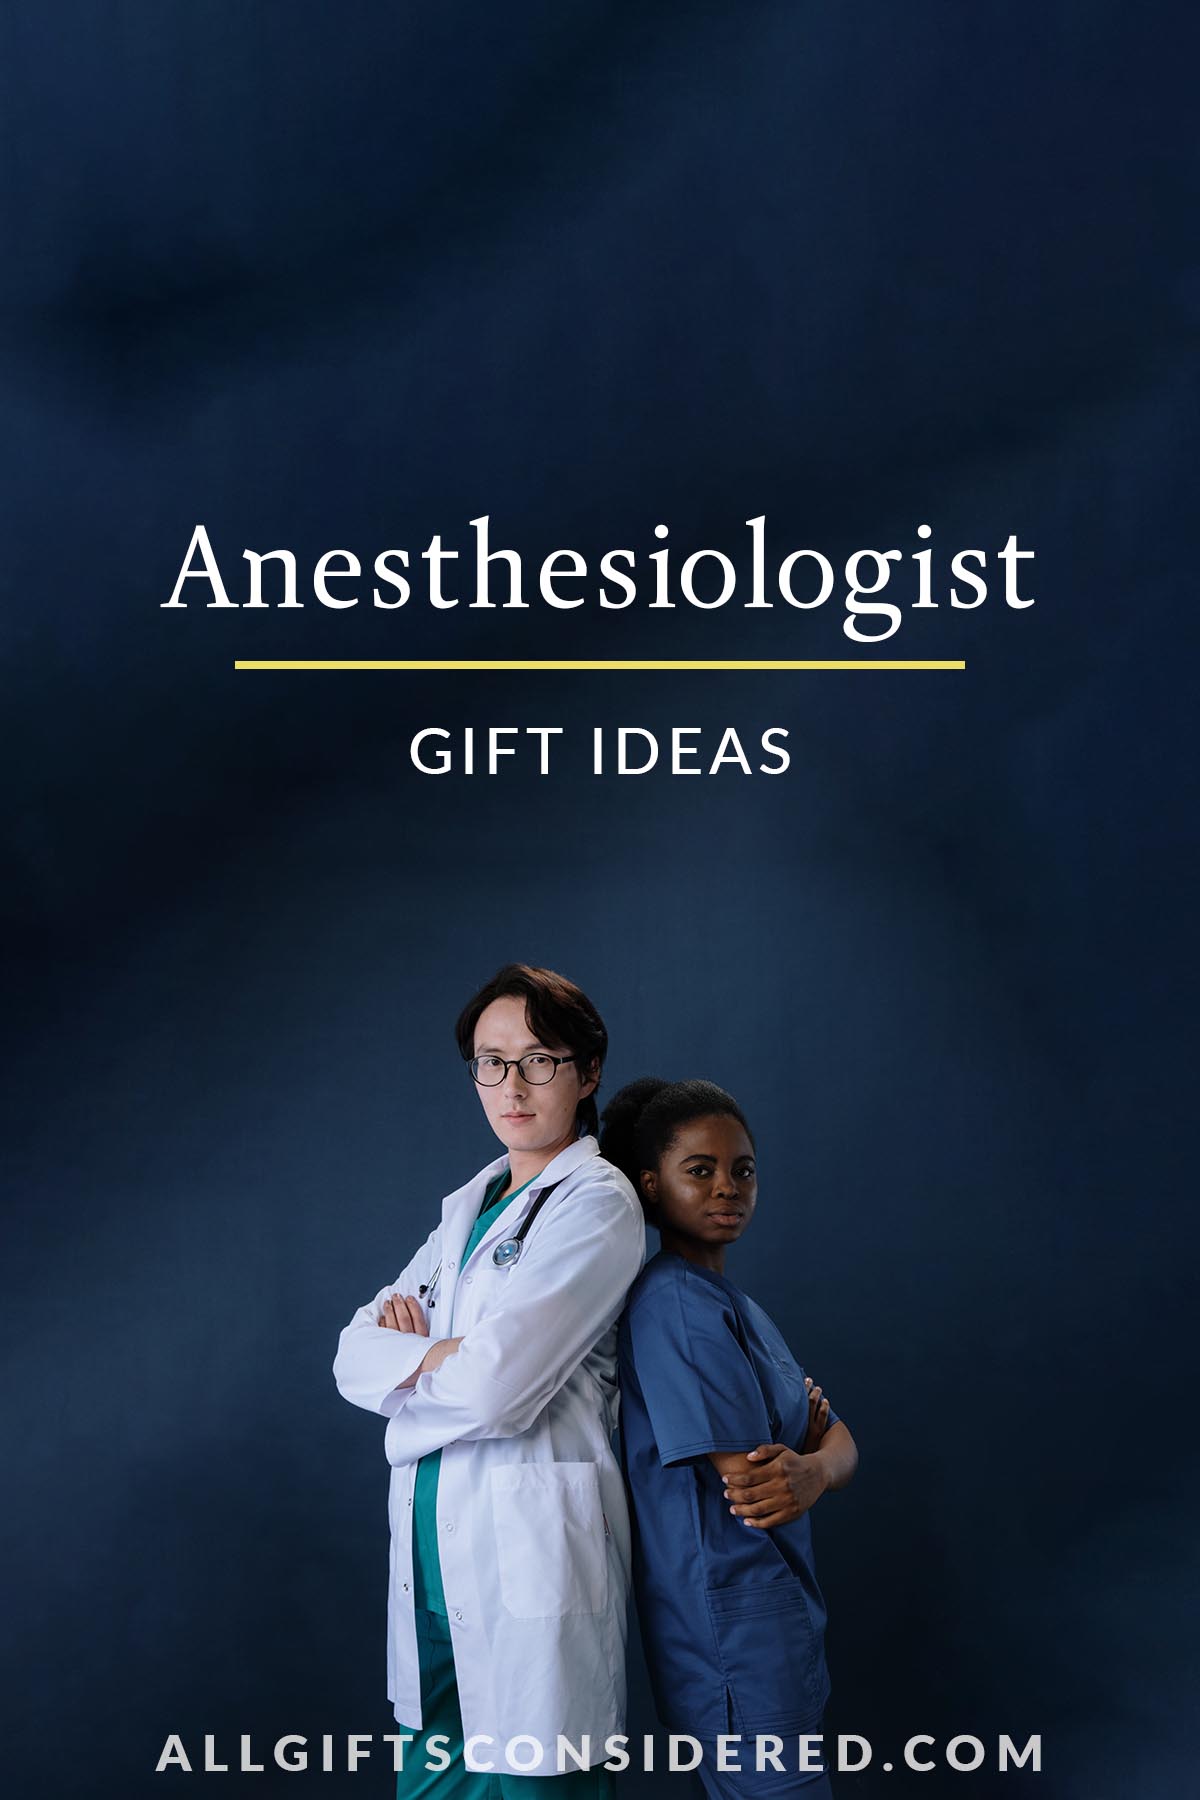 anesthesiologist gift ideas - feature image